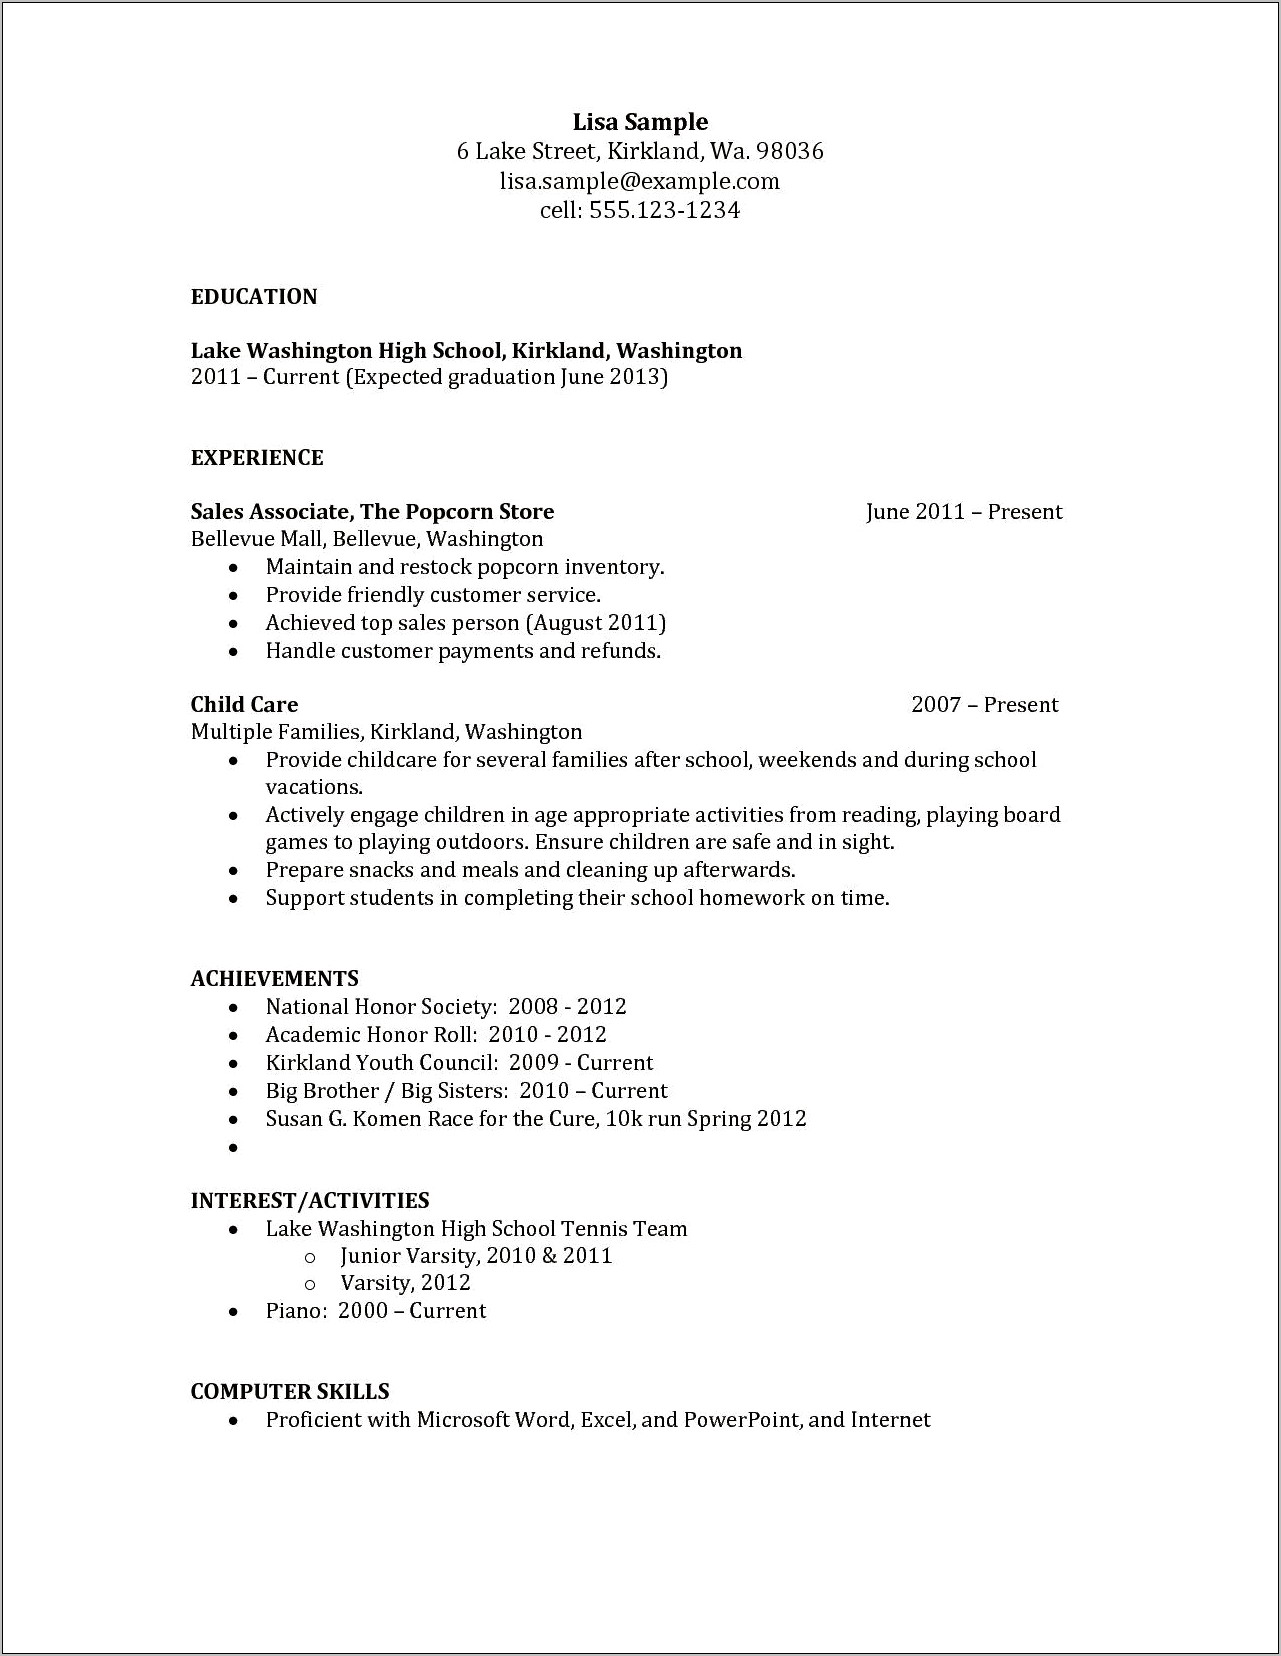 High School Student Resume For Sales Associate Position